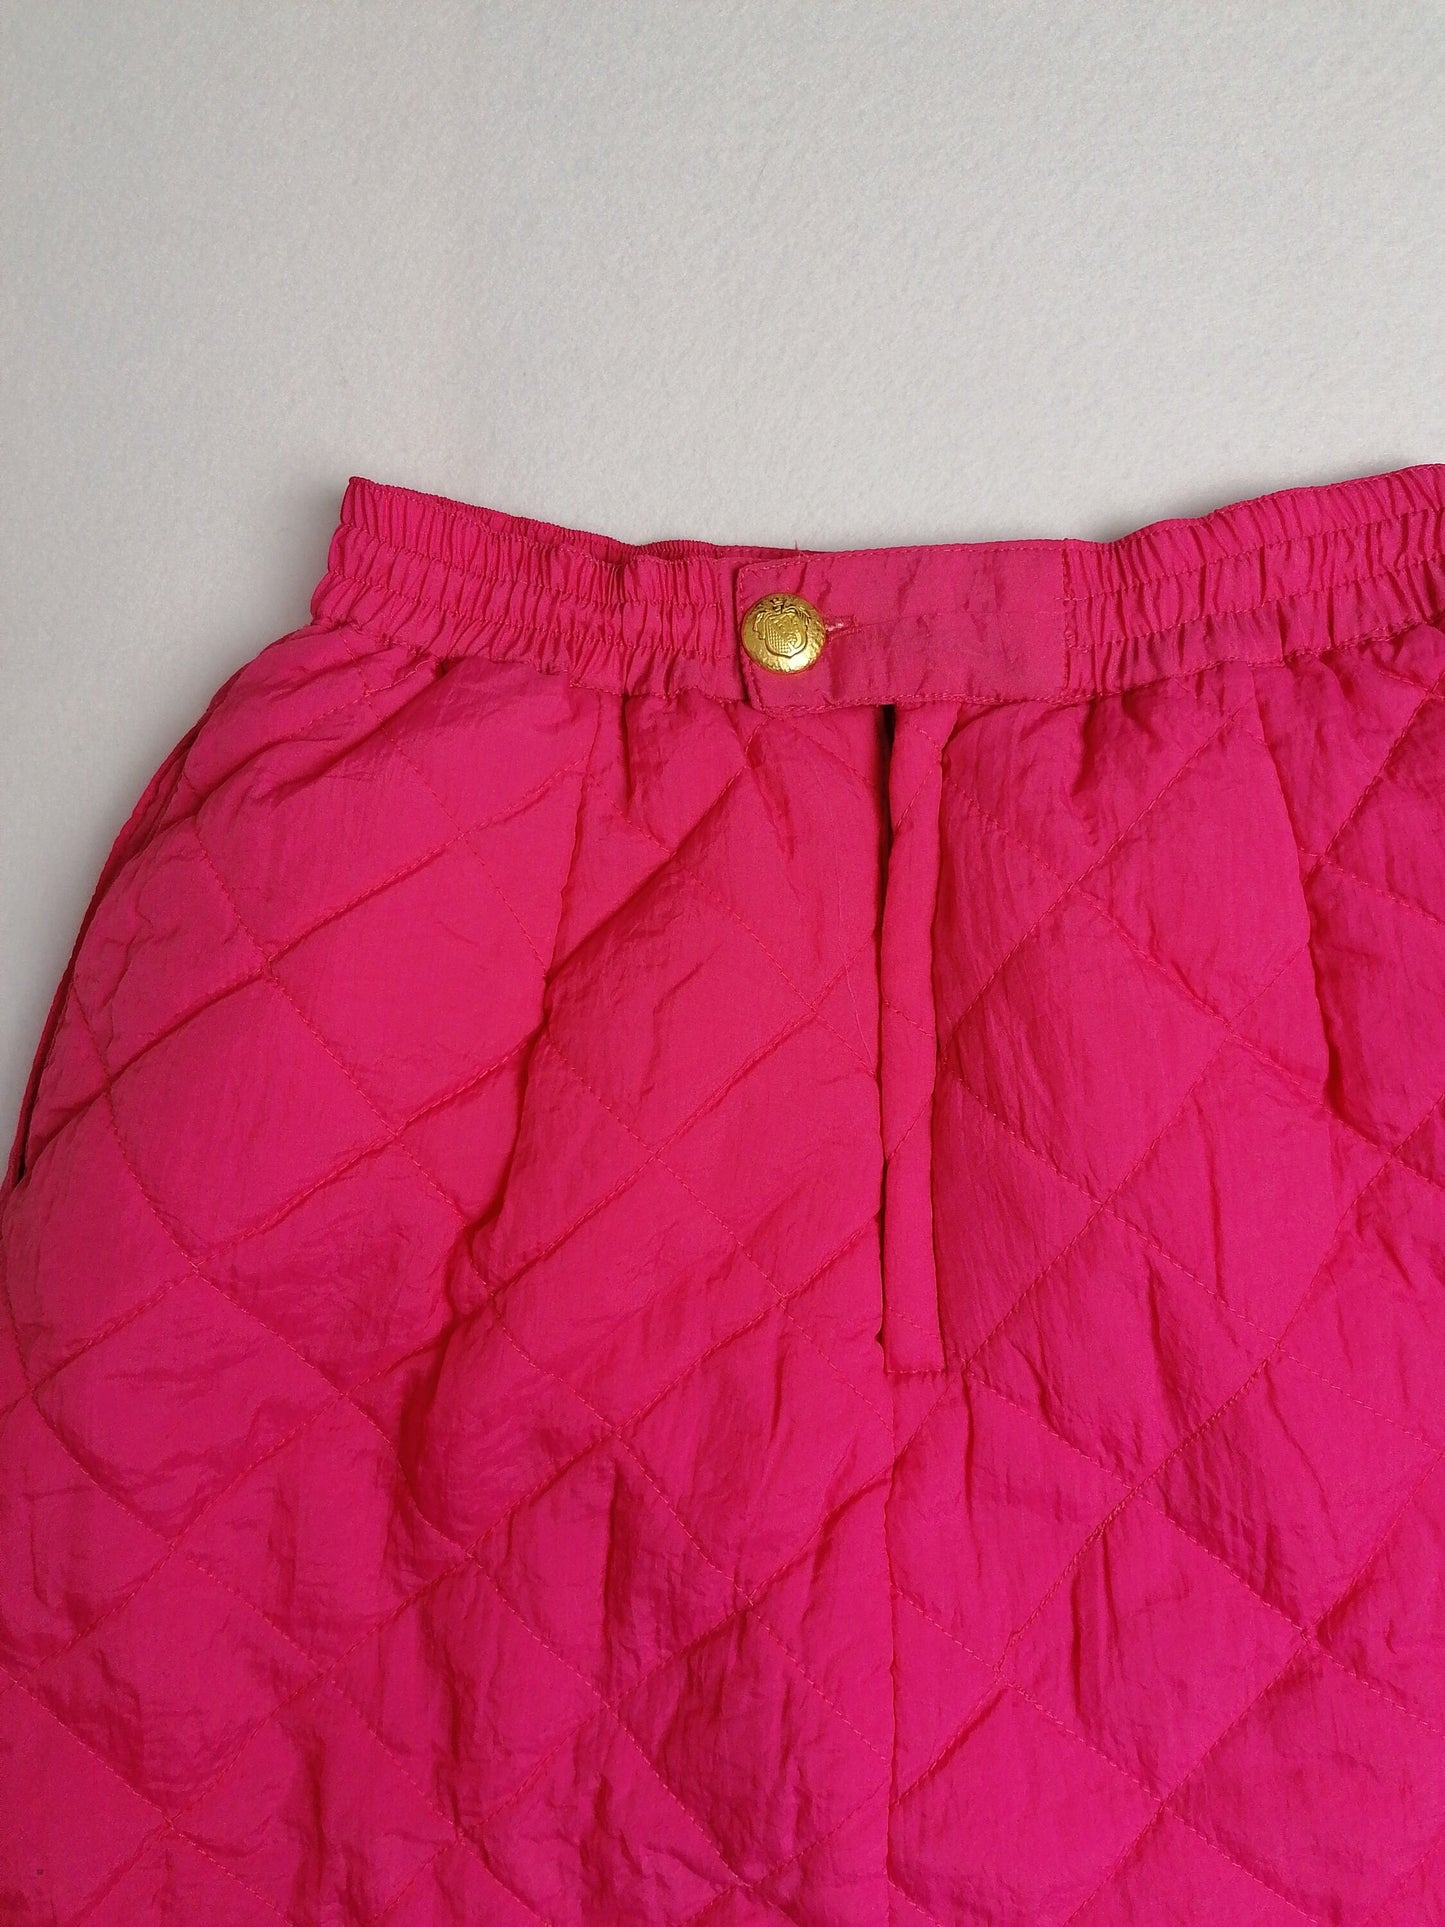 80's Quilted Skirt Nylon Padded High Waist in Pink ~ size S-M